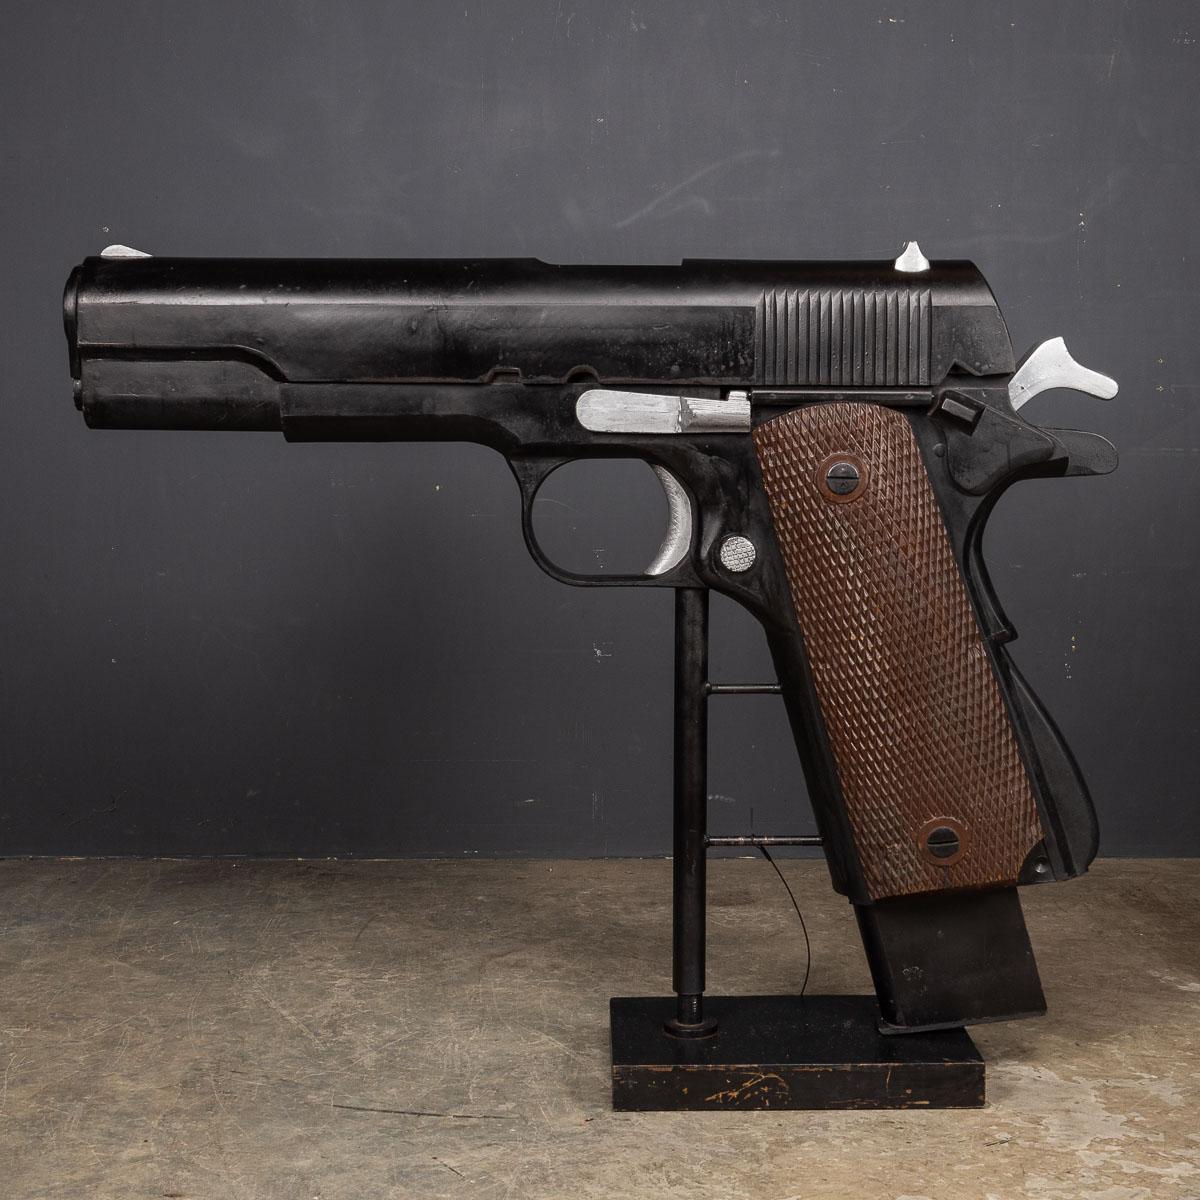 This enormous model of the M1911, standing over a meter tall, also known as the Colt 1911 or Colt Government for Colt-produced models, stands as an iconic firearm. This single-action, recoil-operated, semi-automatic pistol is chambered for the .45